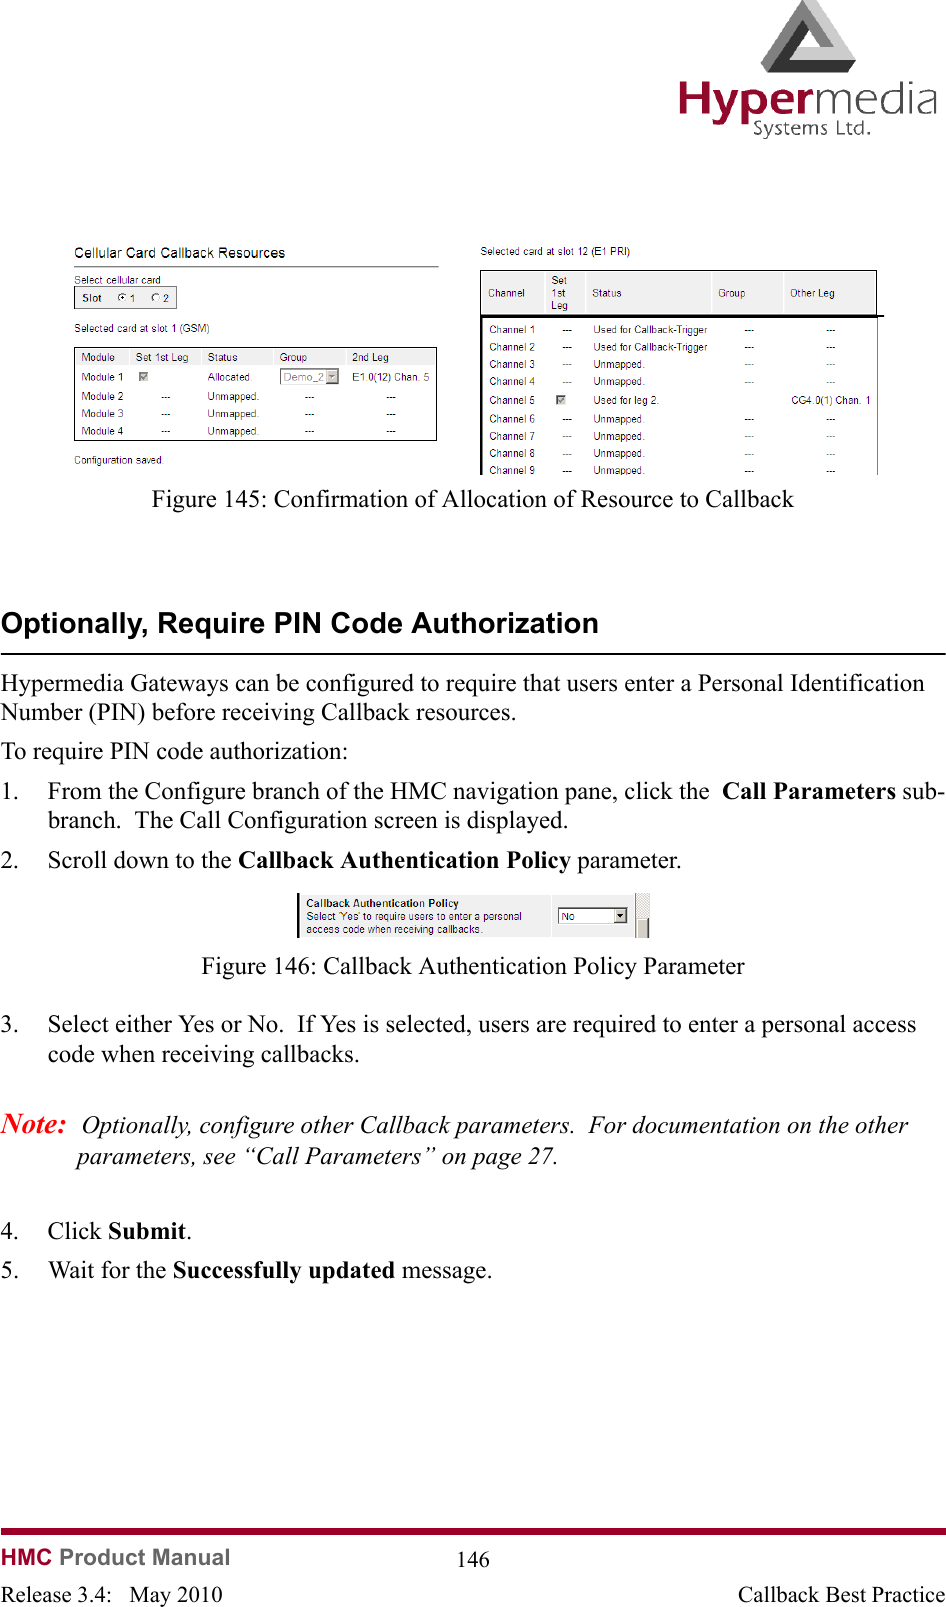   HMC Product Manual  146Release 3.4:   May 2010 Callback Best Practice              Figure 145: Confirmation of Allocation of Resource to CallbackOptionally, Require PIN Code AuthorizationHypermedia Gateways can be configured to require that users enter a Personal Identification Number (PIN) before receiving Callback resources.To require PIN code authorization:  1. From the Configure branch of the HMC navigation pane, click the  Call Parameters sub-branch.  The Call Configuration screen is displayed.2. Scroll down to the Callback Authentication Policy parameter.                Figure 146: Callback Authentication Policy Parameter3. Select either Yes or No.  If Yes is selected, users are required to enter a personal access code when receiving callbacks.Note:  Optionally, configure other Callback parameters.  For documentation on the other parameters, see “Call Parameters” on page 27.4. Click Submit.  5. Wait for the Successfully updated message.